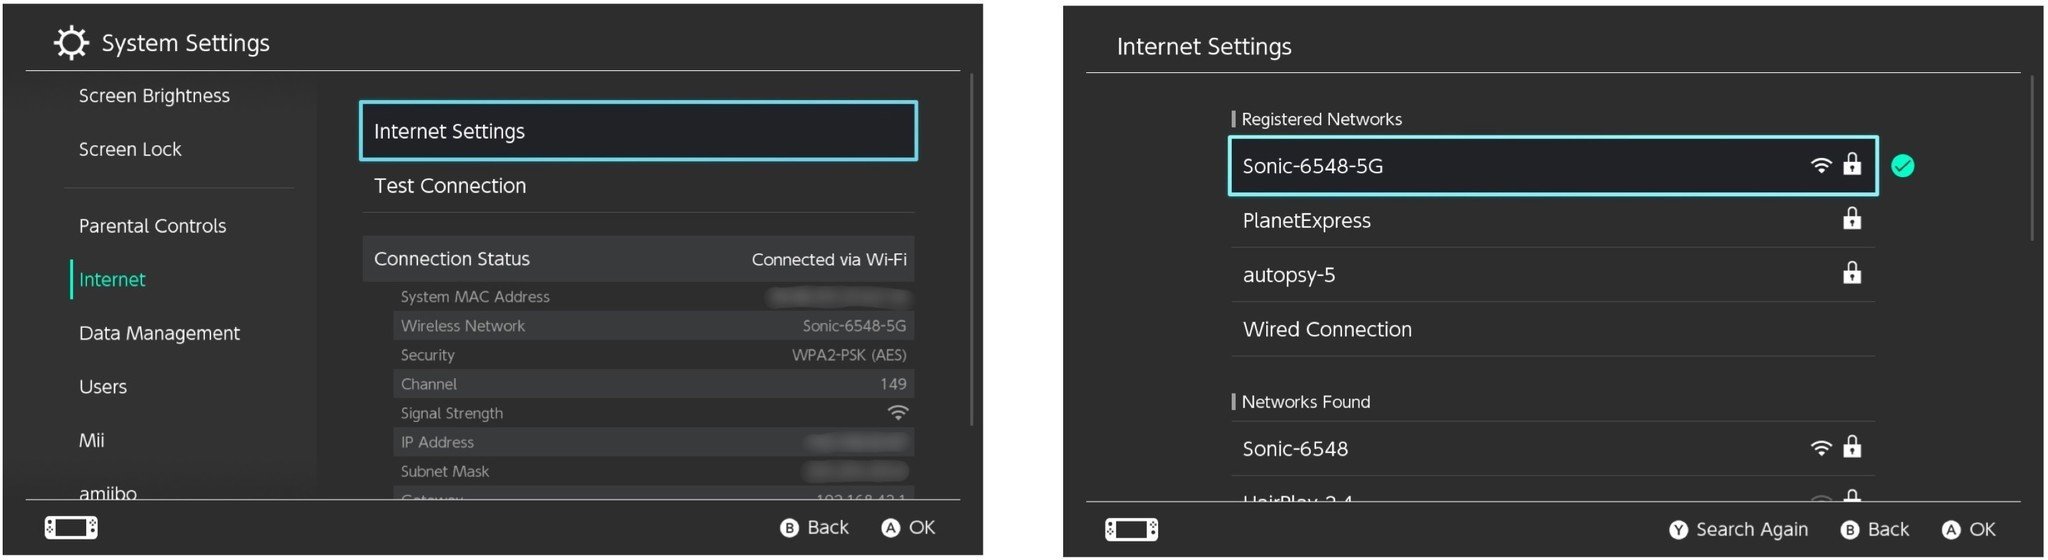 Select Internet Settings, then select your current network